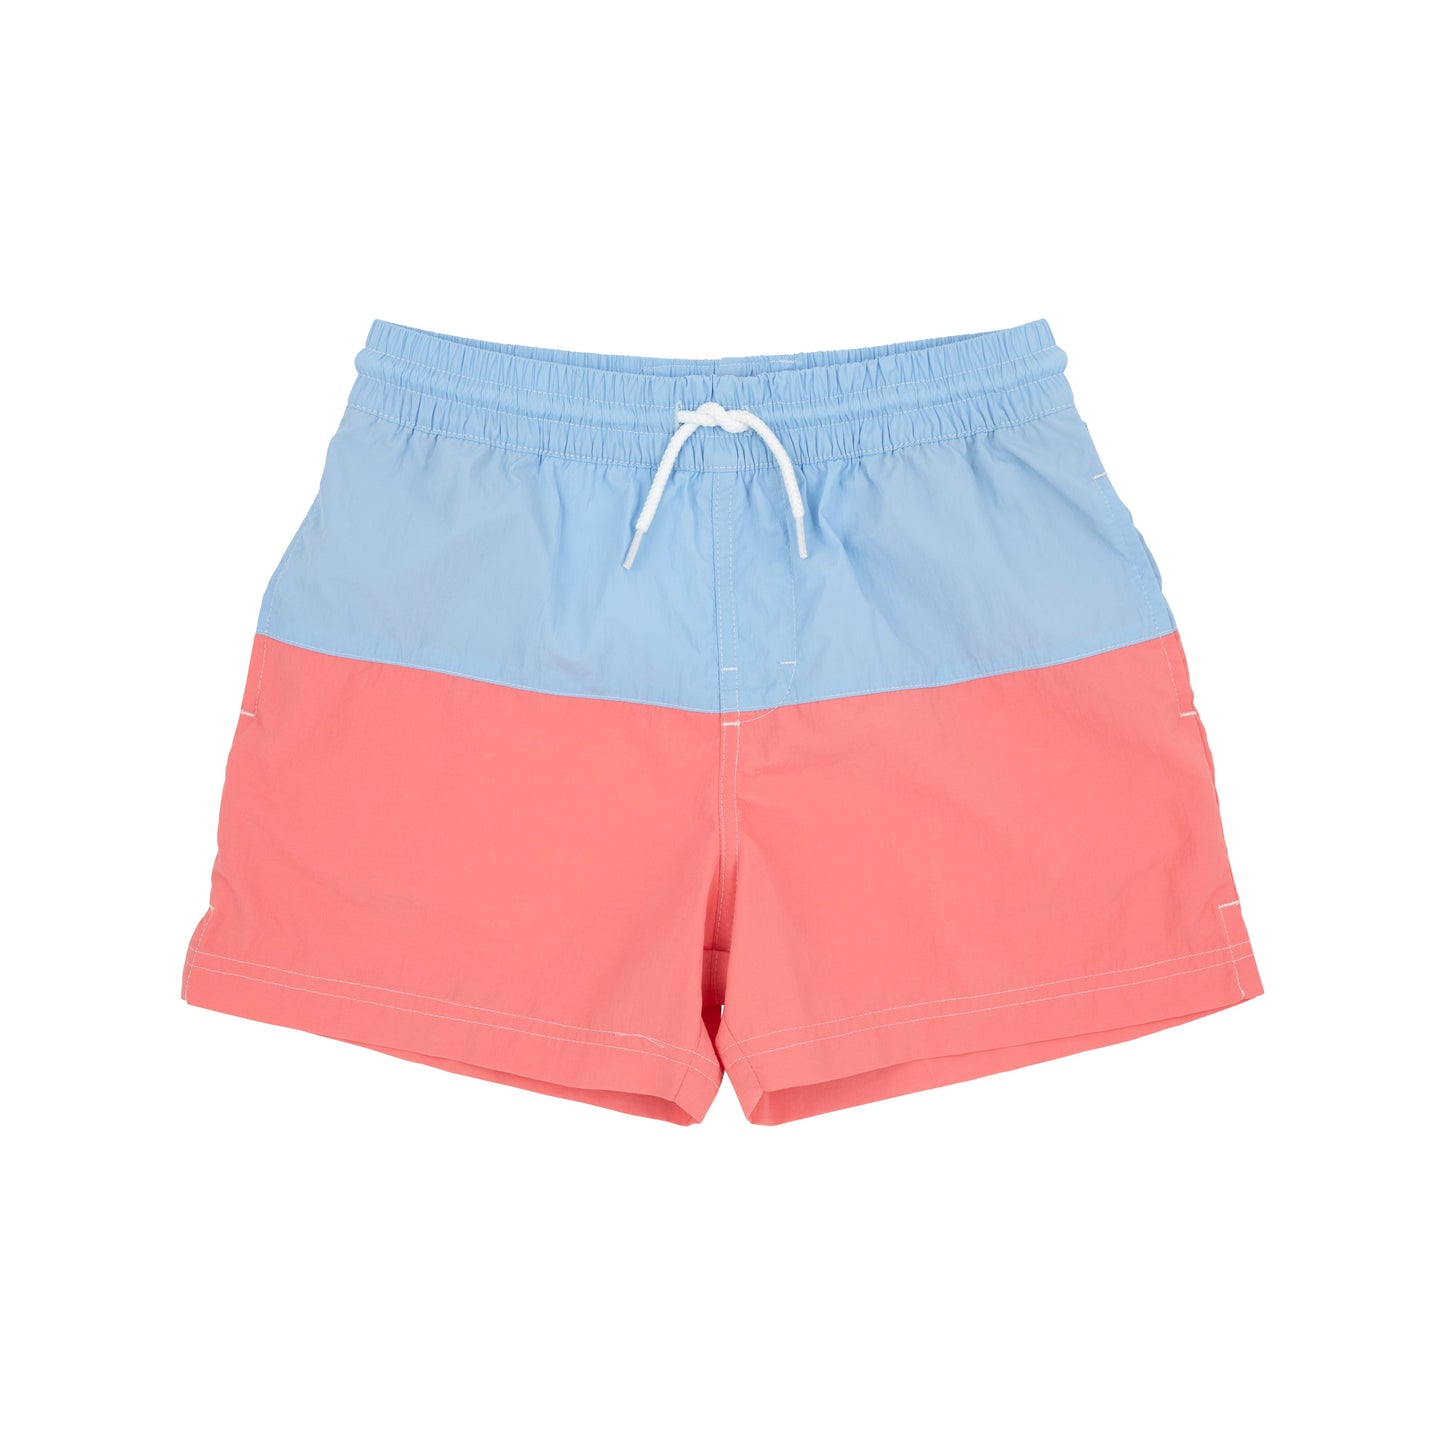 The Beaufort Bonnet - Country Club Colorblock Trunks Beale Street Blue & Parrot Cay Coral With T.B.B.C. Pocket